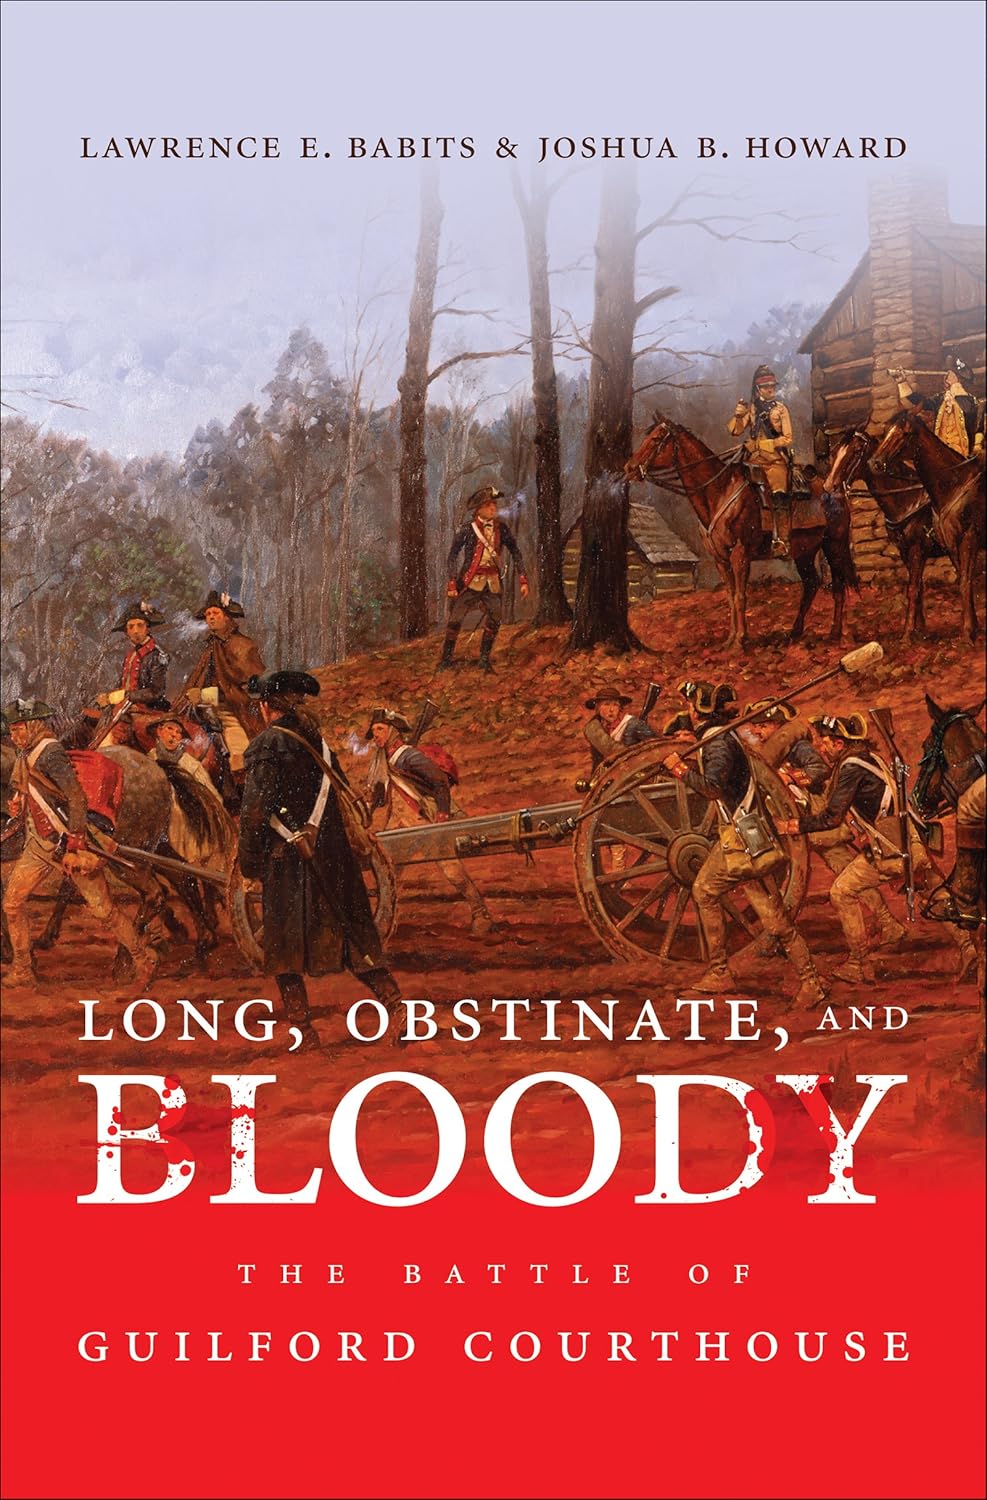 Babits Lawrence E., Howard Joshua B. Long, Obstinate, and Bloody: The Battle of Guilford Courthouse 